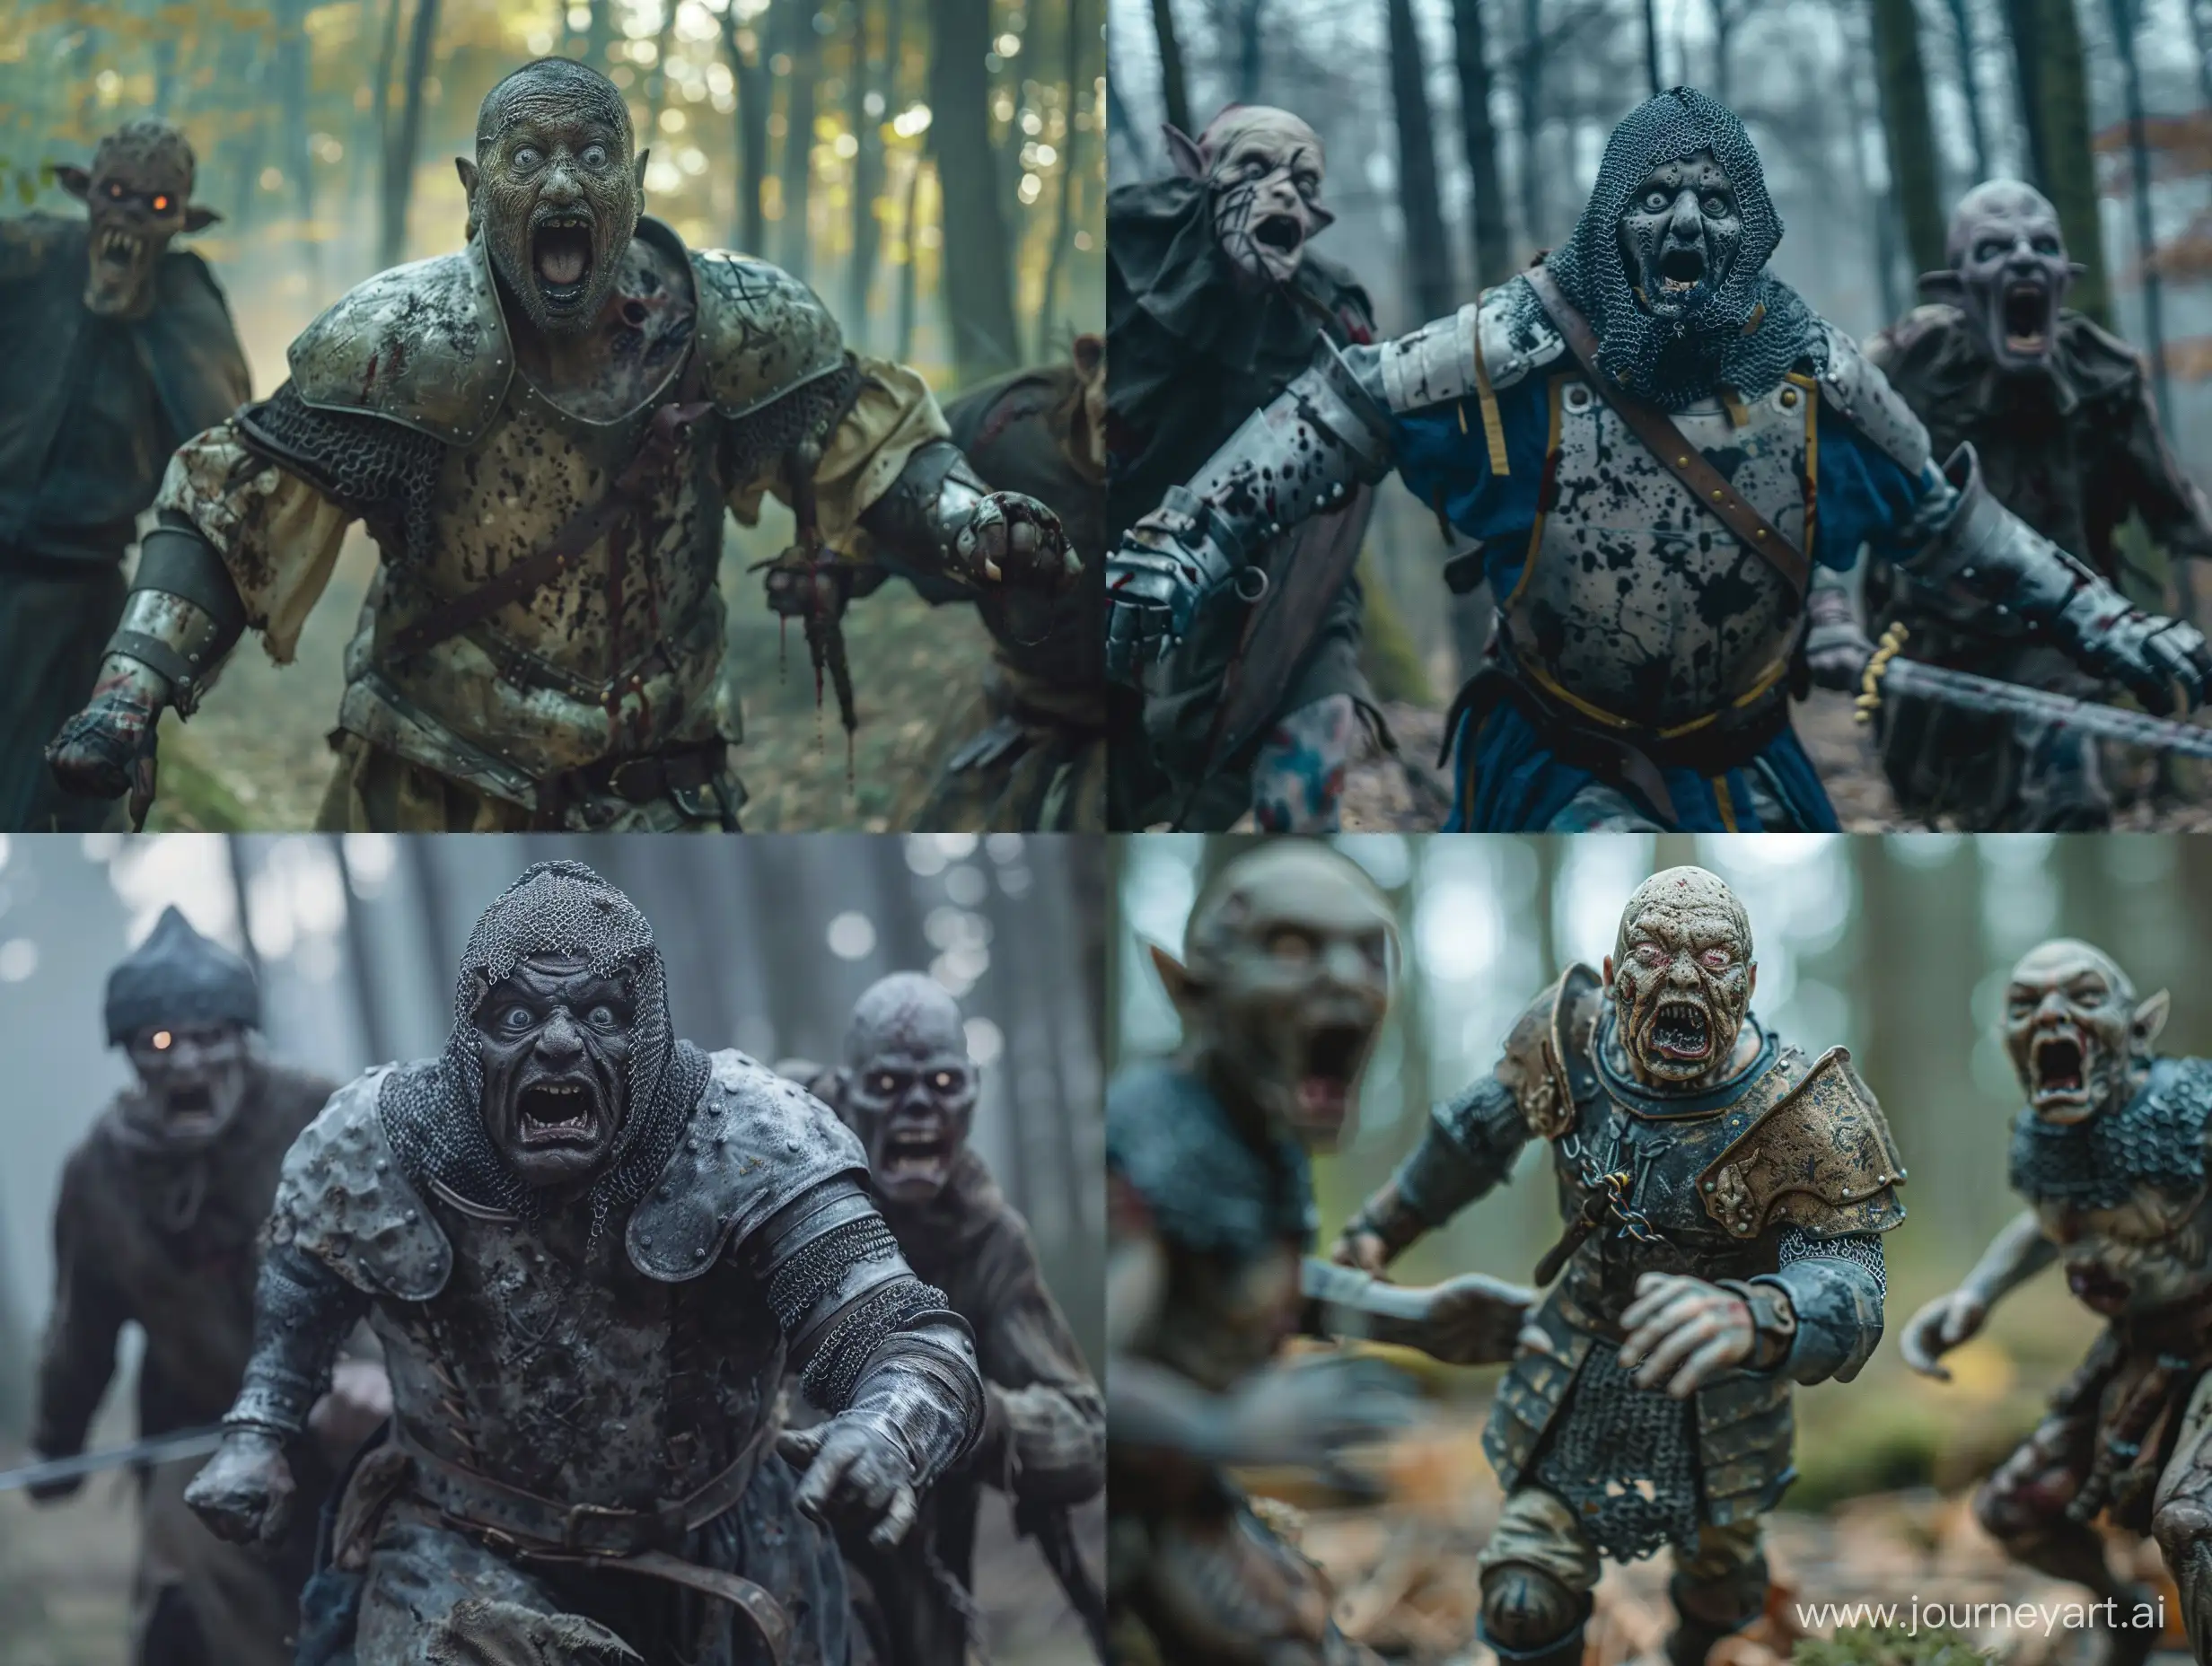 close-up, a scared ugly medieval warrior runs away from two ghouls, some catch up with him, forest, morning, dof, cinematic